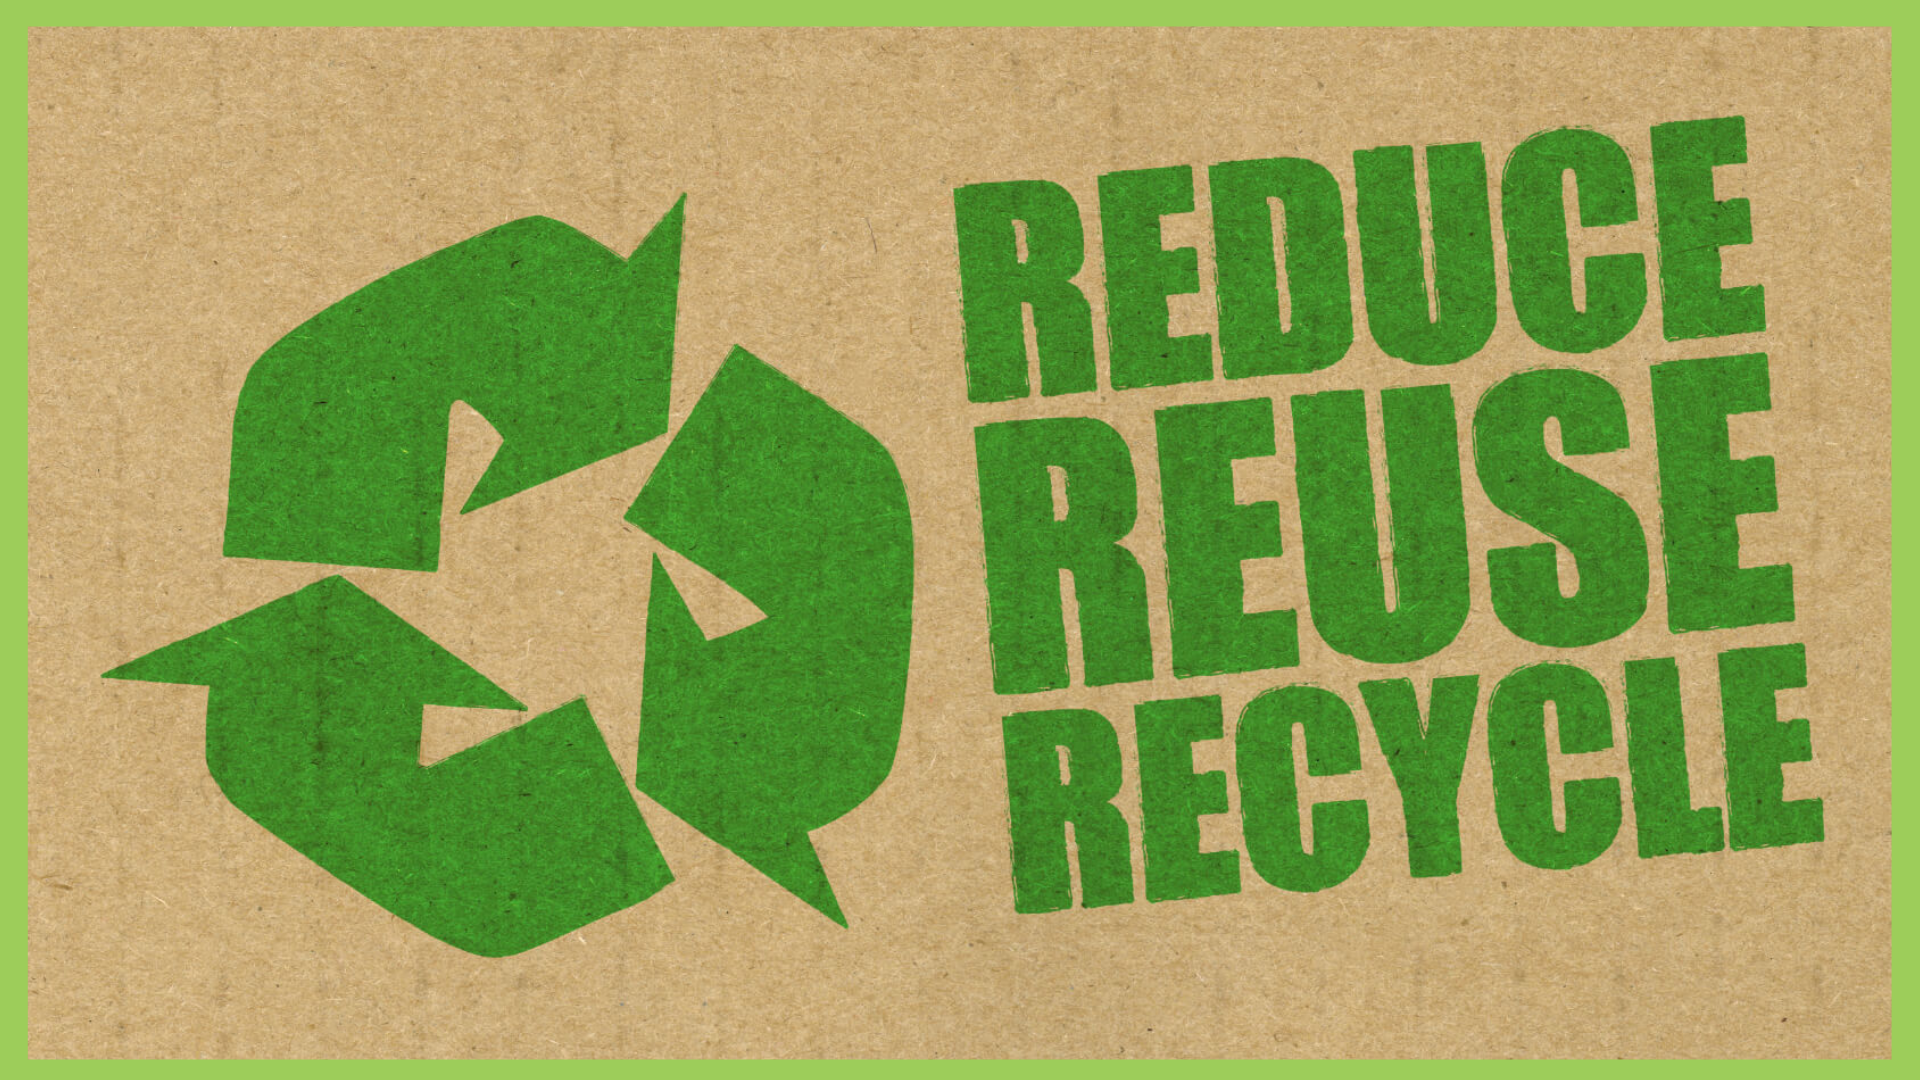 We should recycle. Знак reduce reuse recycle. 3r reduce reuse recycle. Правило трех r reduce reuse recycle. Логотип reuse.